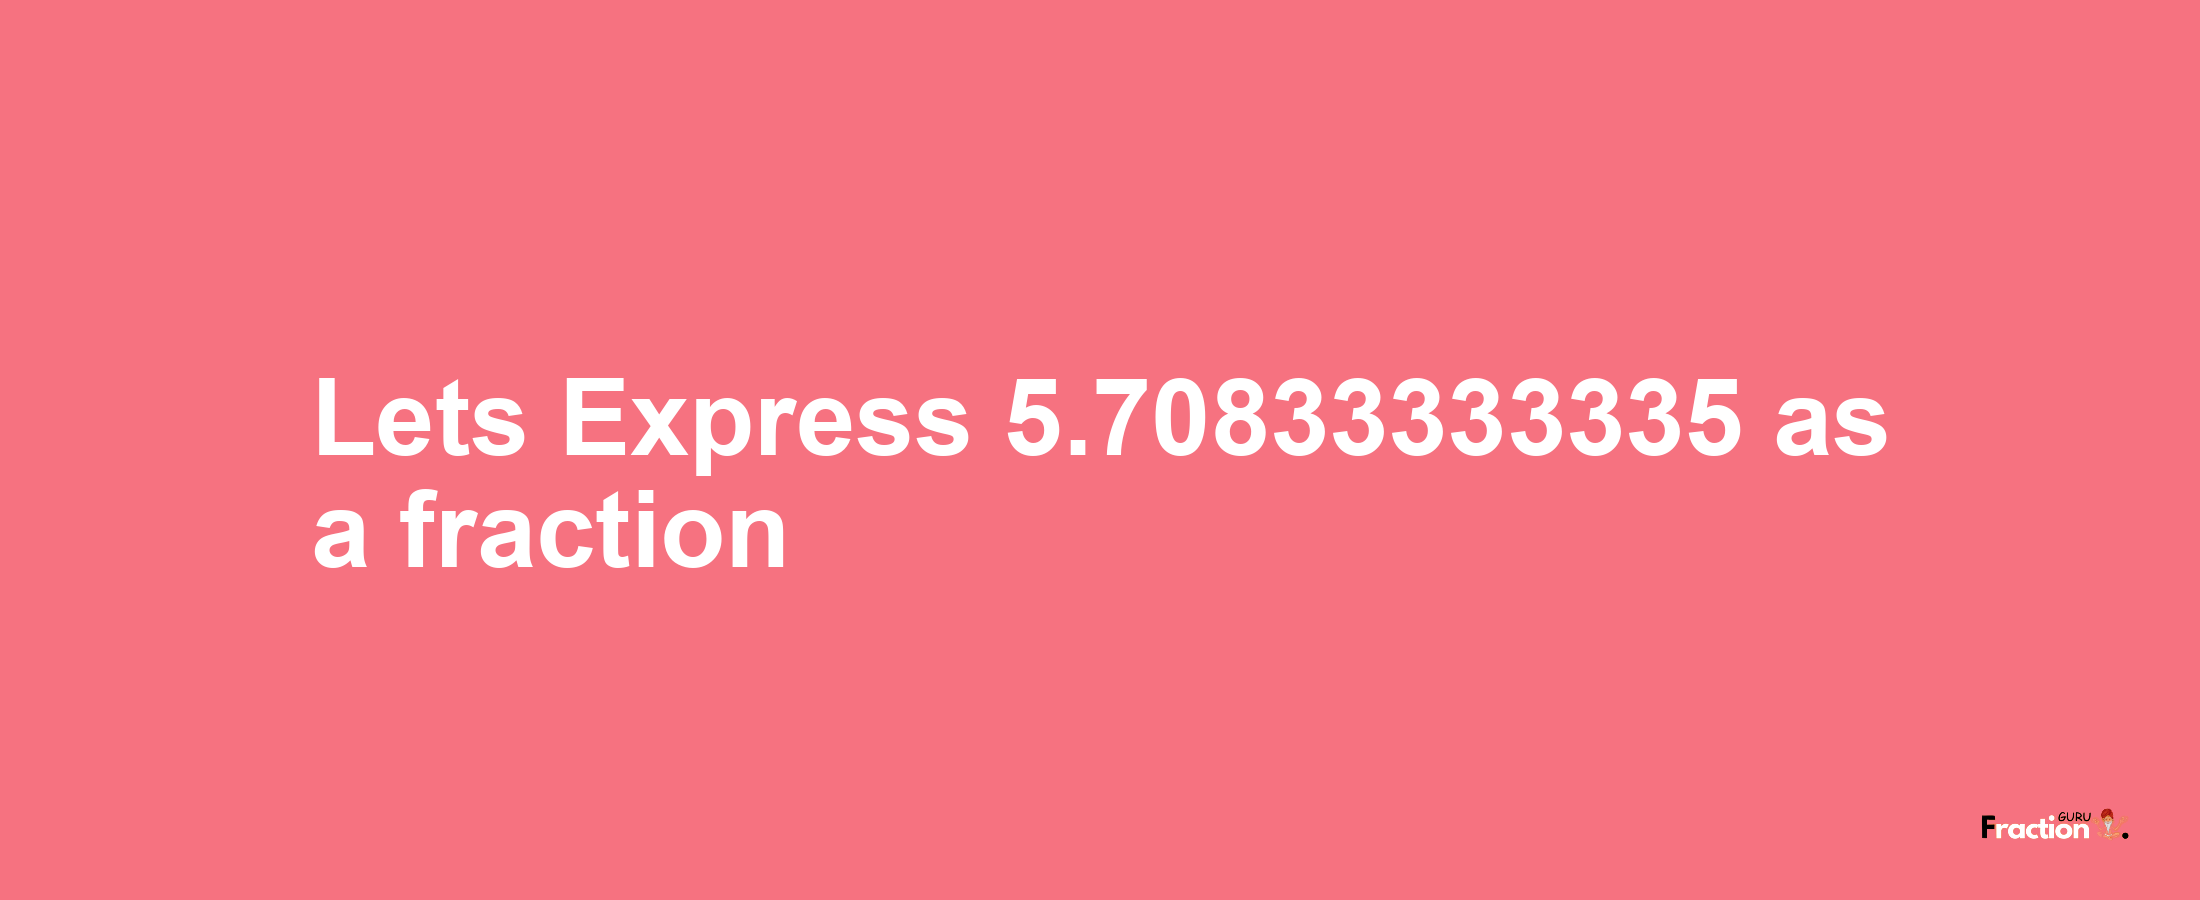 Lets Express 5.70833333335 as afraction